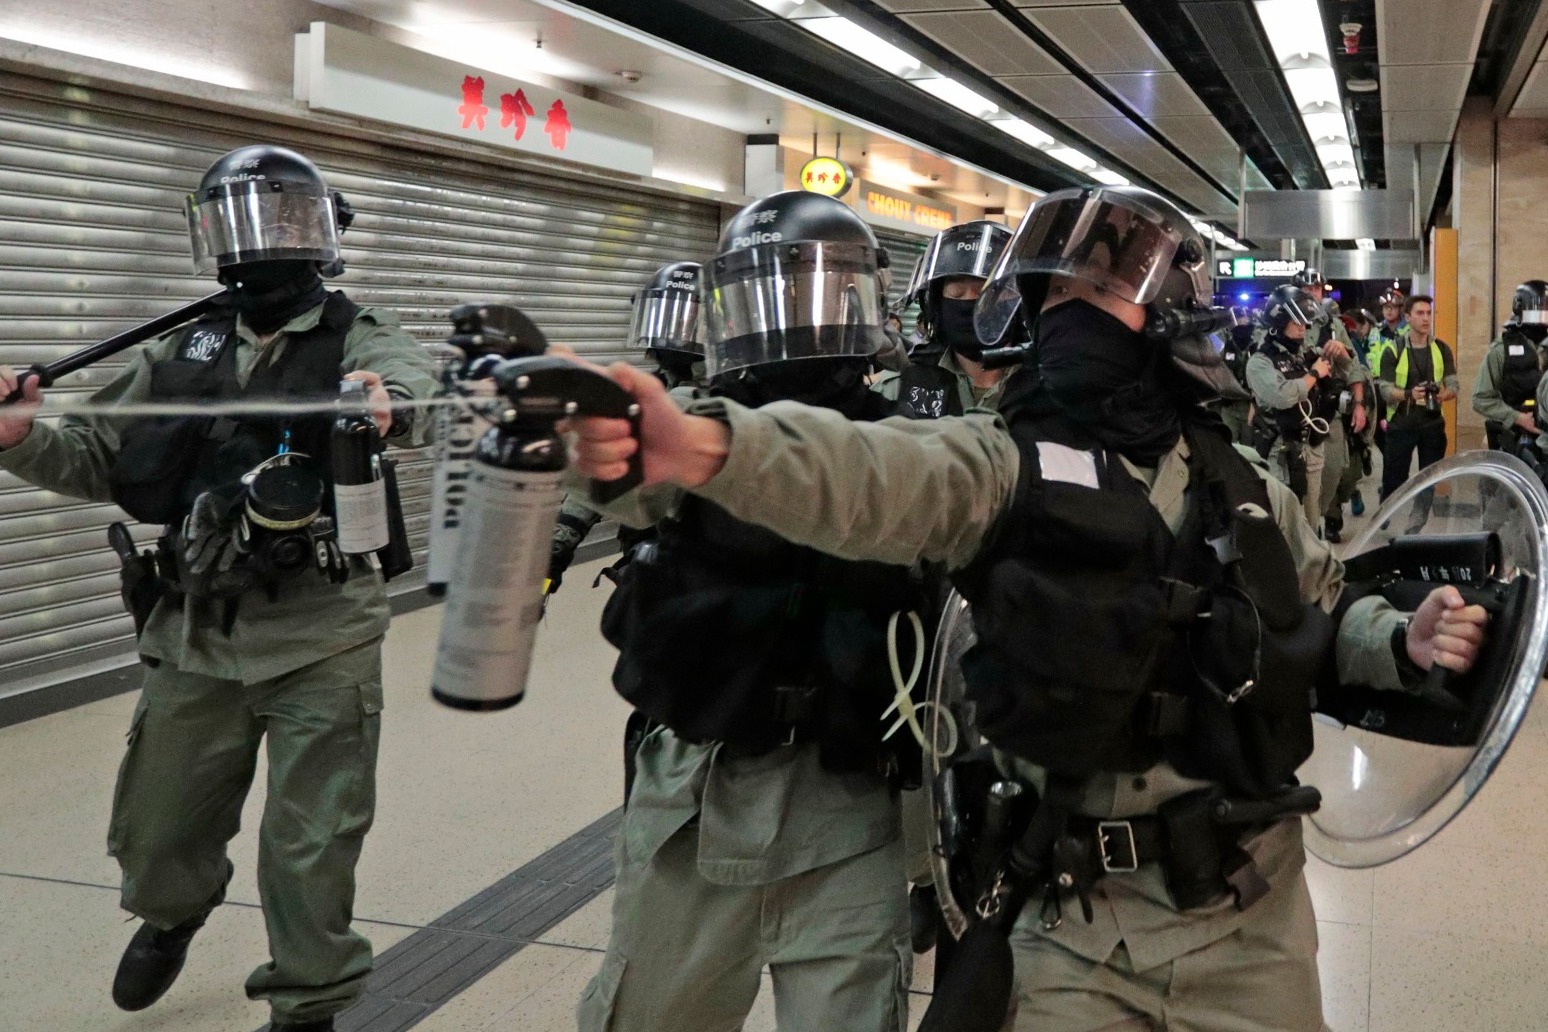 BLOODSHED IN A SHOPPING CENTRE AS HONG KONG RIOTS CONTINUE 